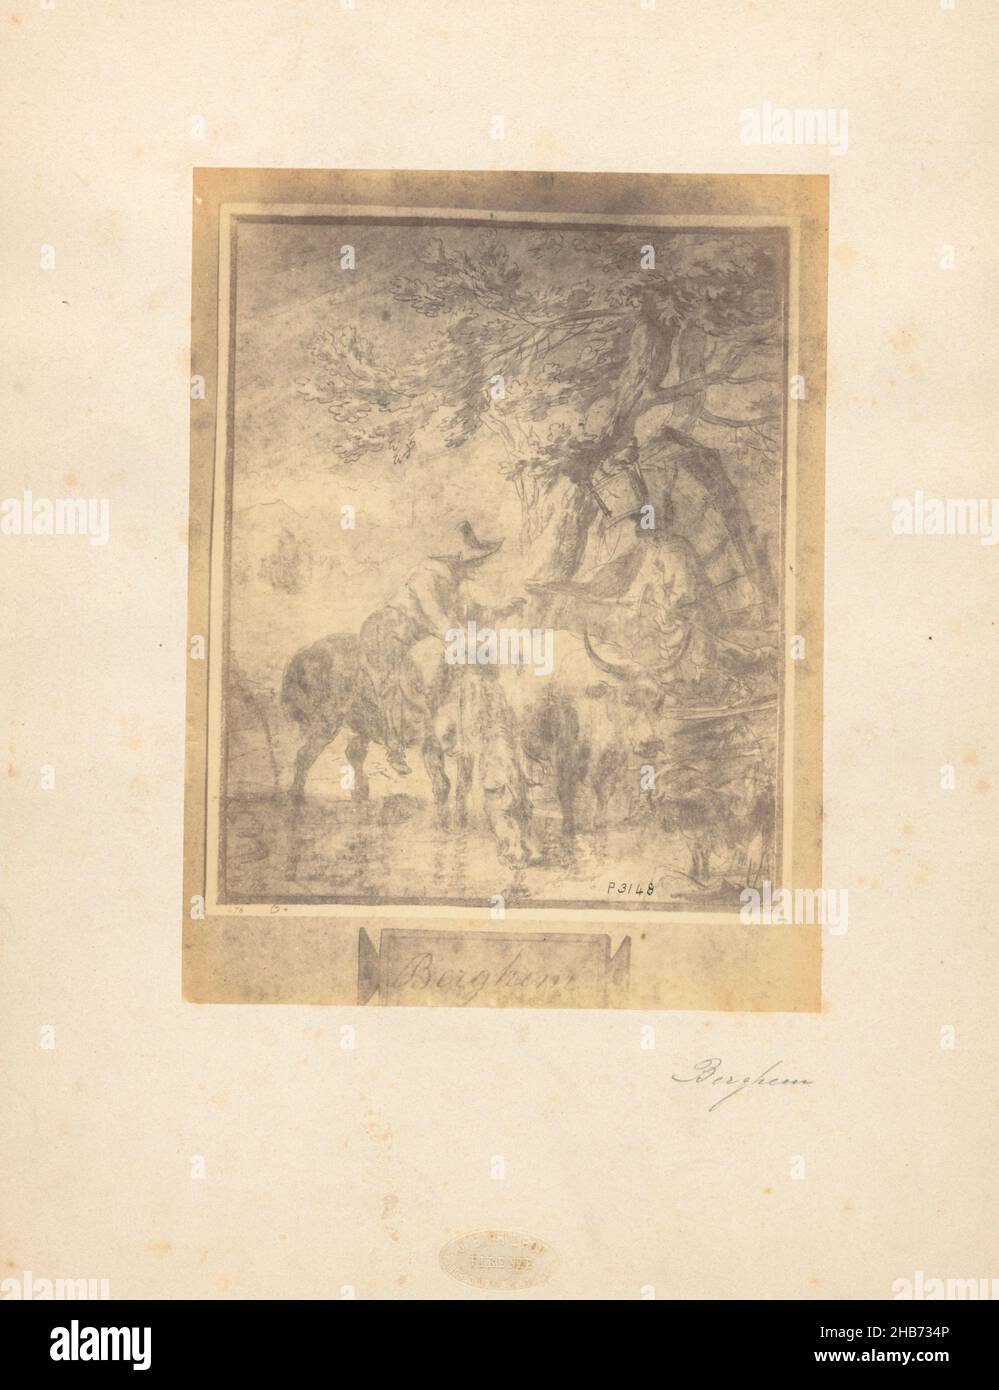 Photoreproduction of a drawing by Nicolaes Berchem, Giovanni Brampton Philpot (mentioned on object), intermediary draughtsman: Nicolaes Pietersz. Berchem (mentioned on object), Florence, 1851 - 1878, paper, cardboard, albumen print, height 193 mm × width 147 mm Stock Photo